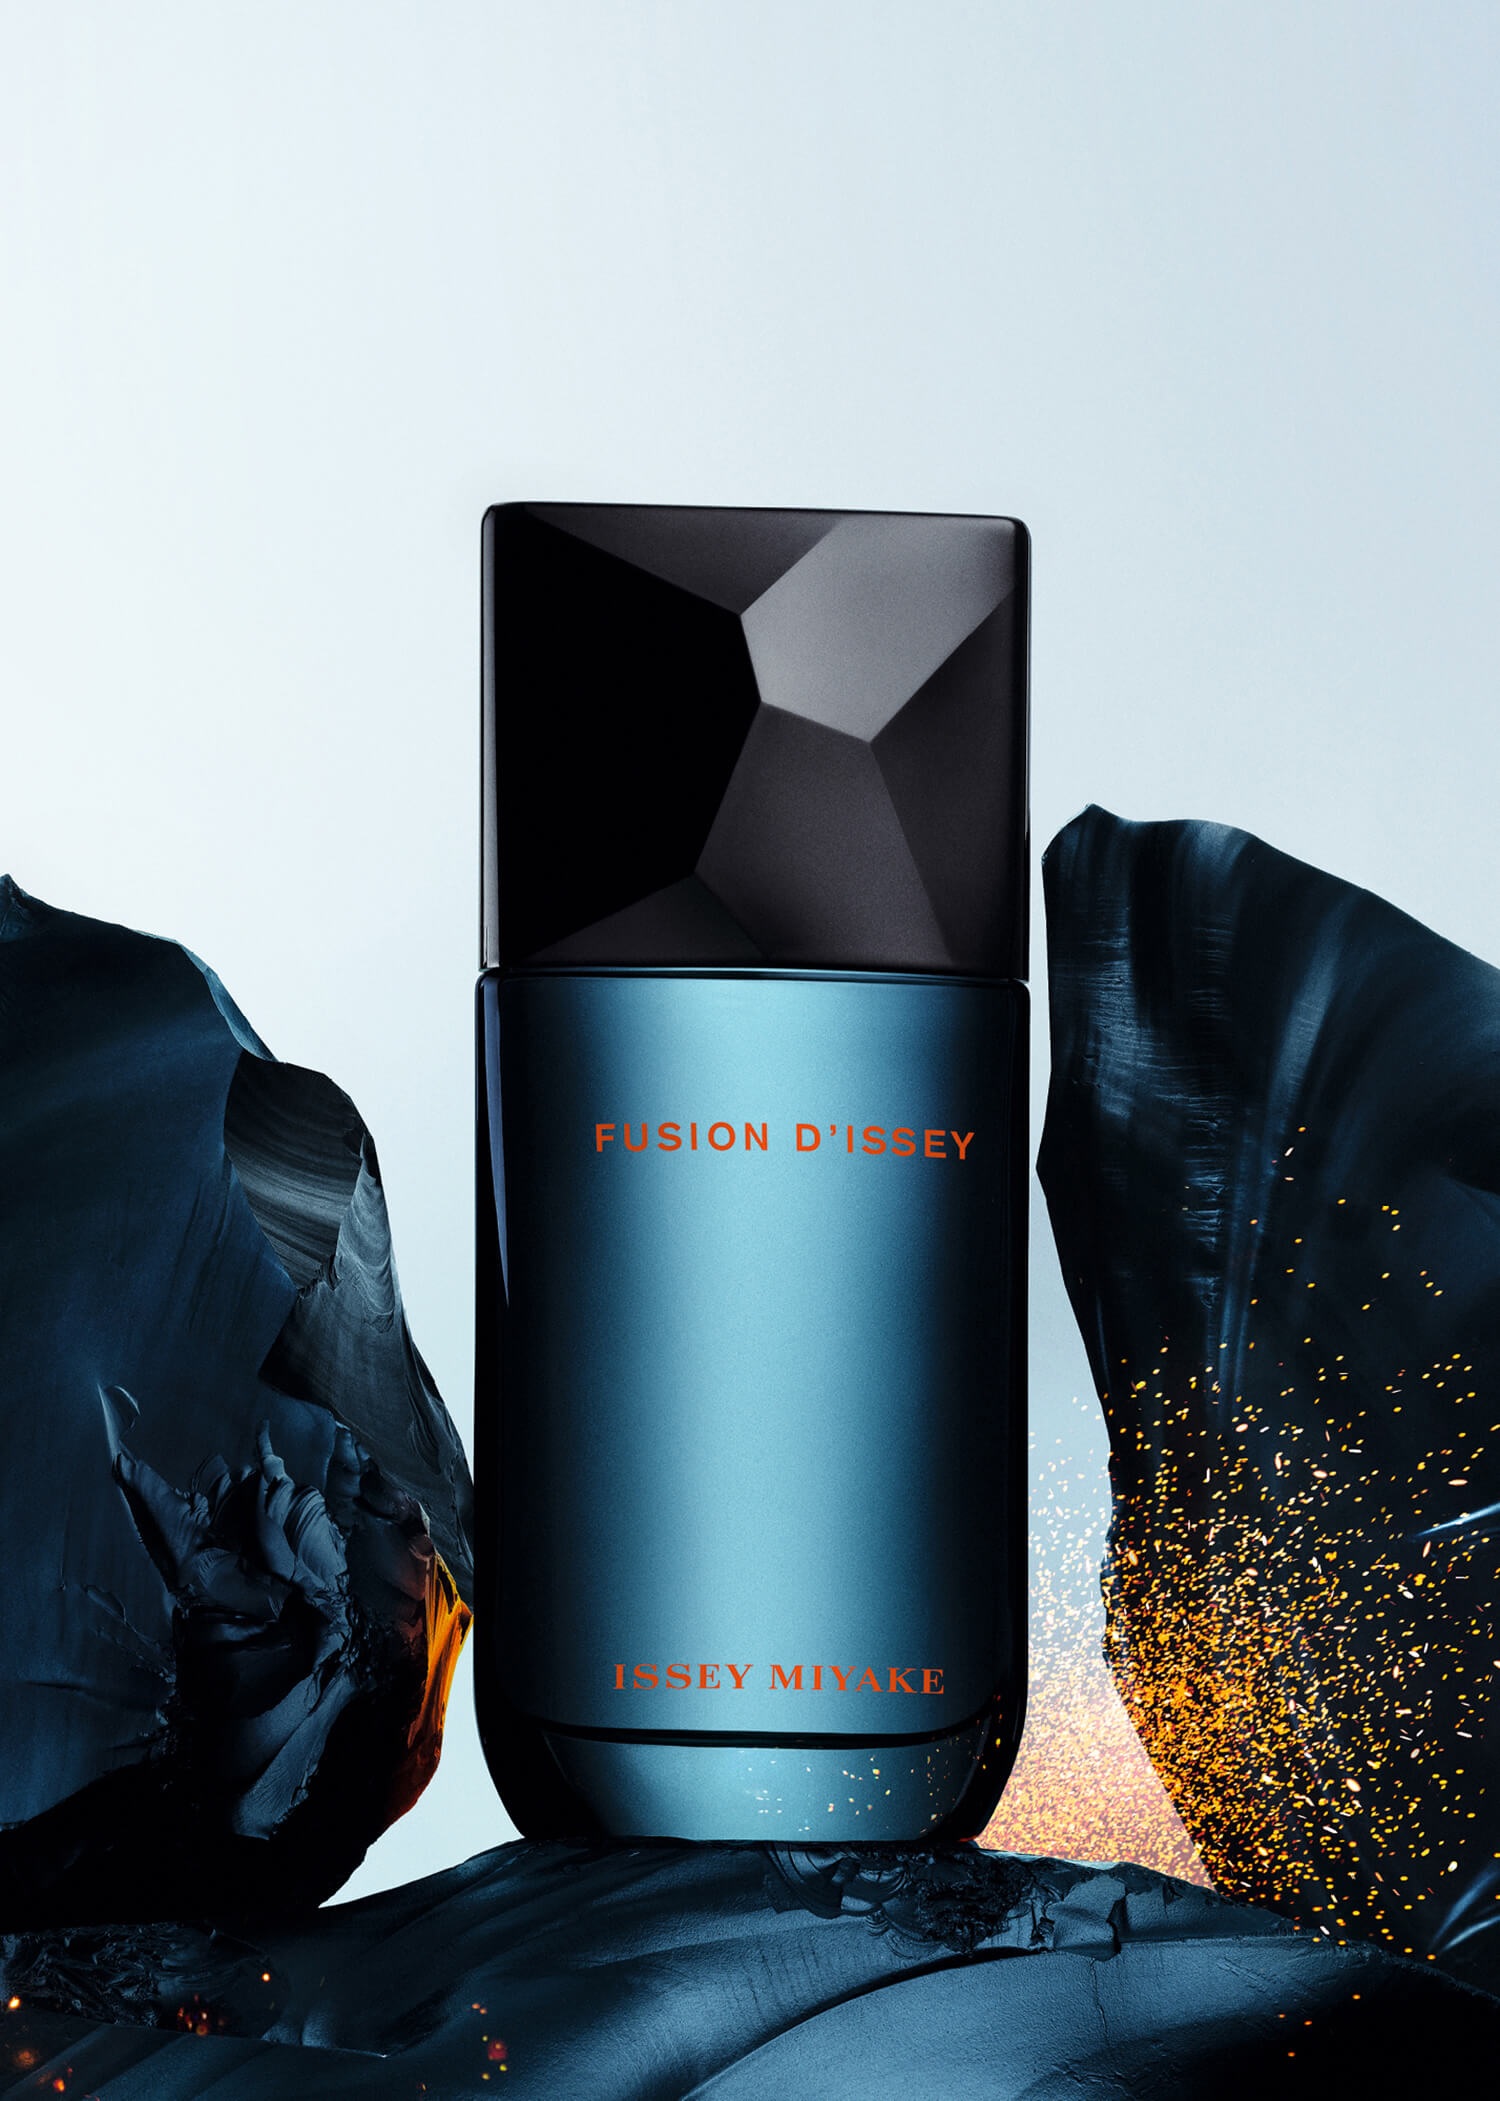 Fusion d'Issey Issey Miyake cologne - a new fragrance for men 2020